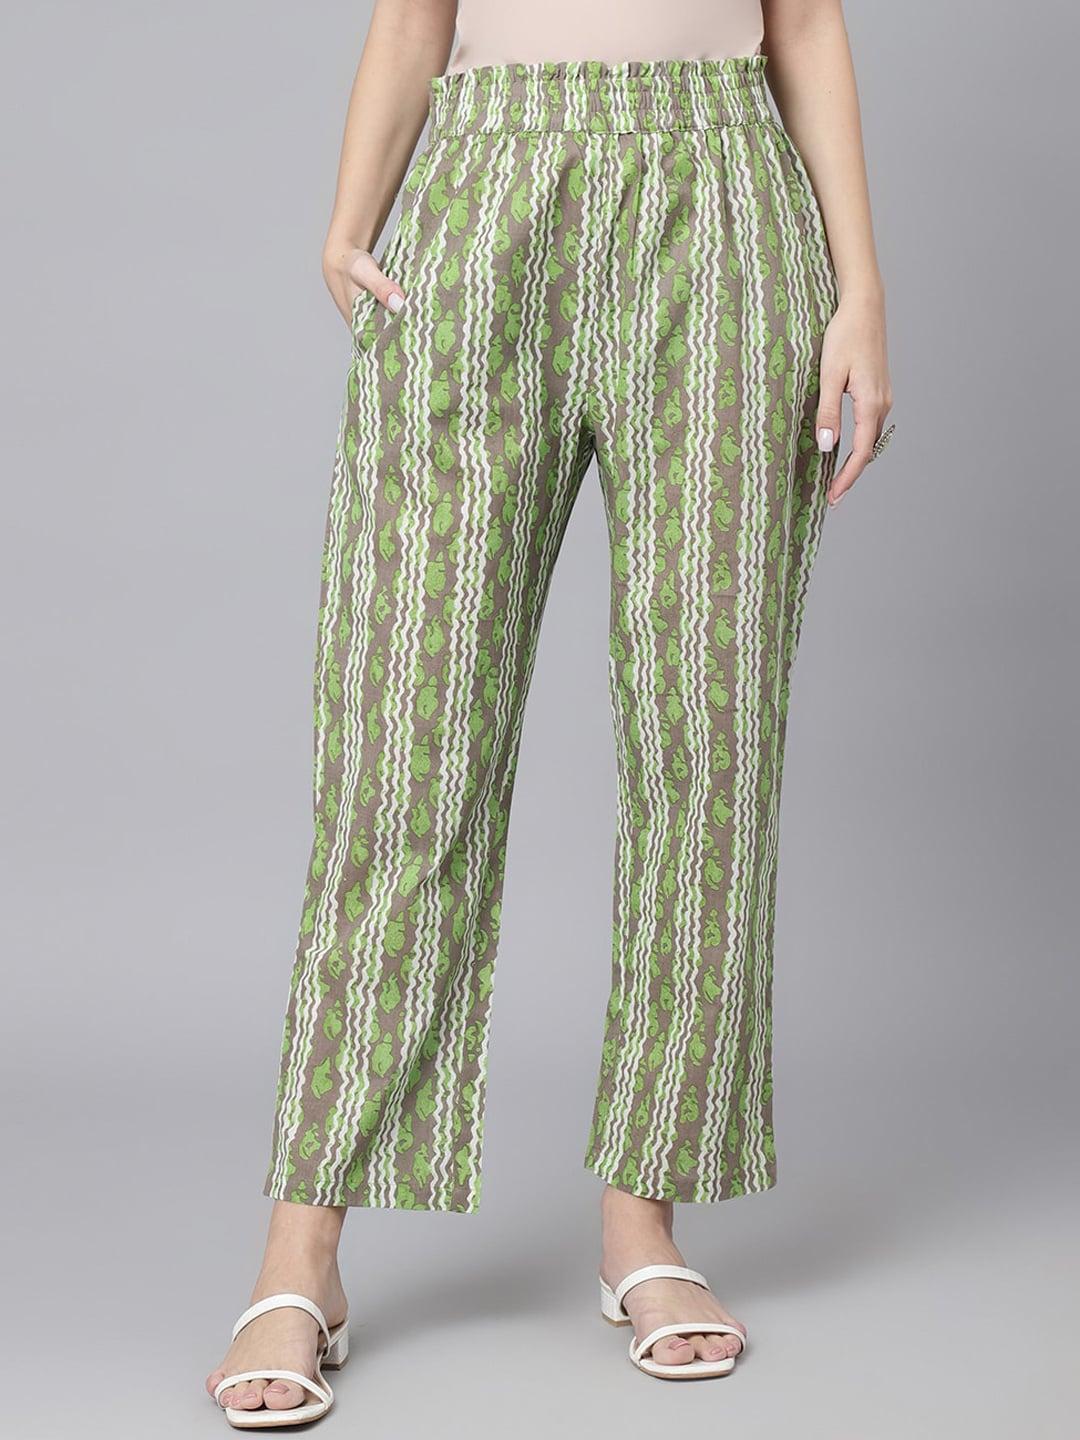 deckedup-women-printed-relaxed-easy-wash-cotton-trousers